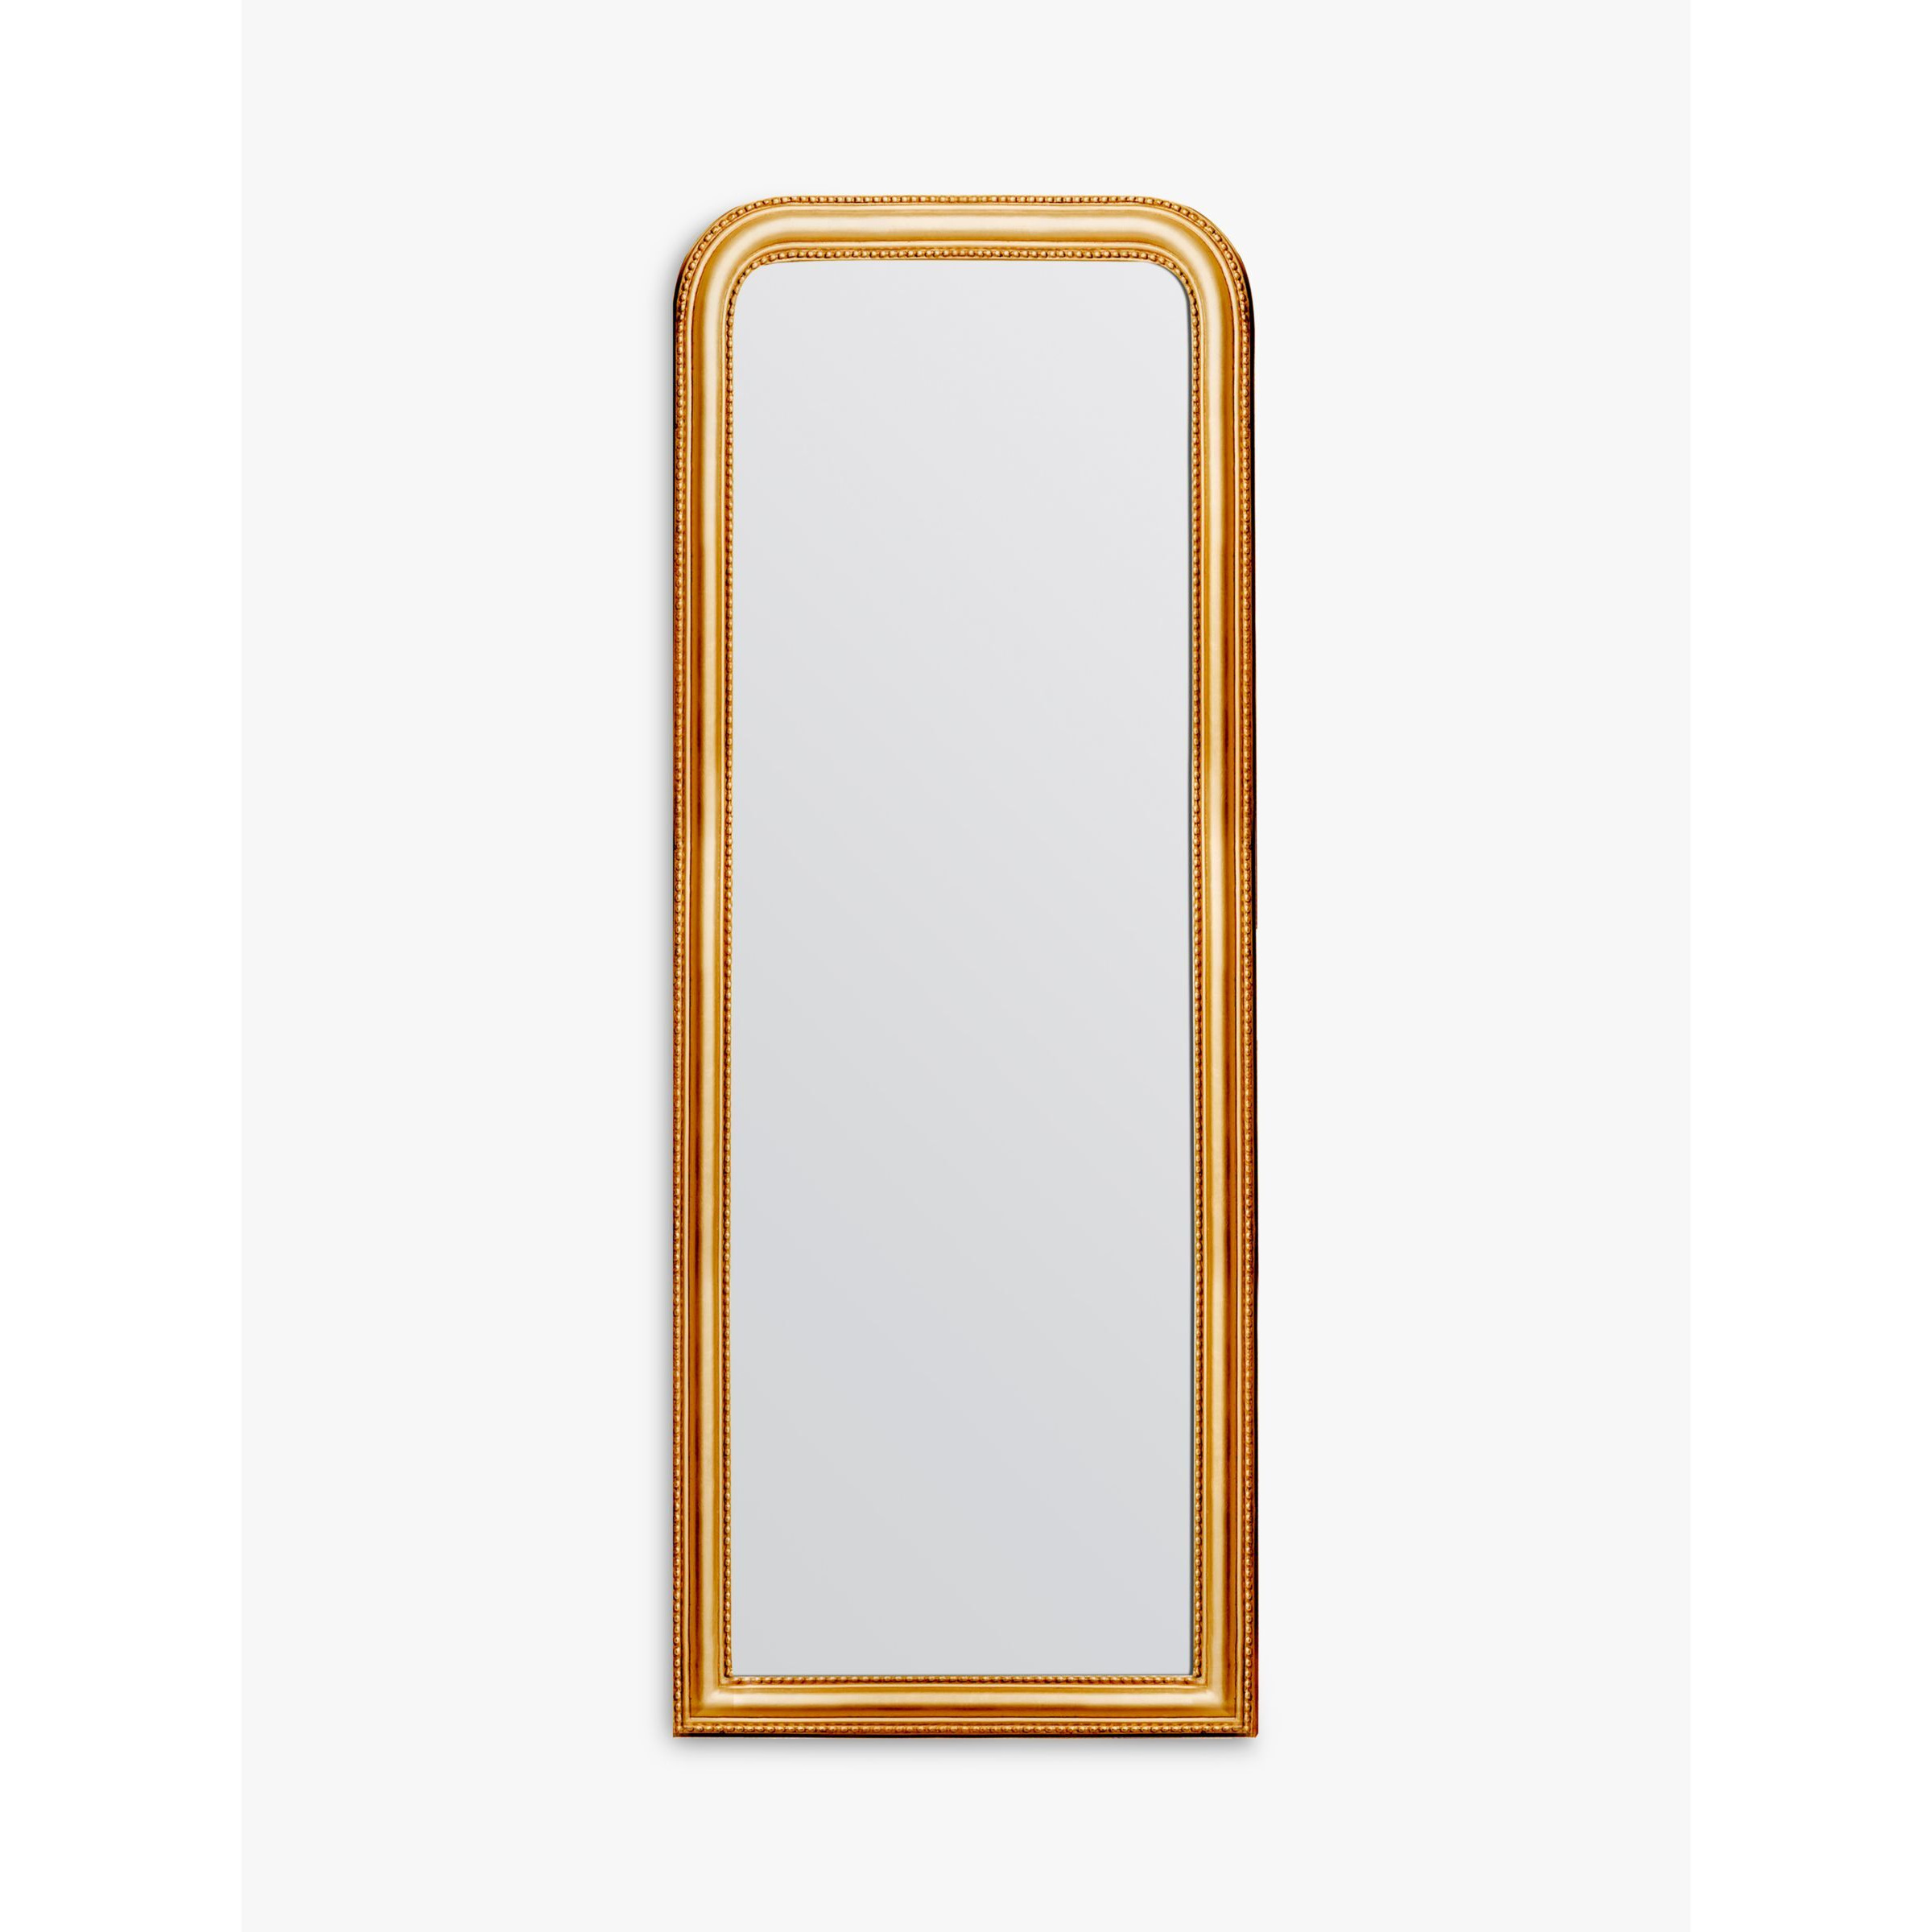 Gallery Direct Worthington Arched Beaded Wall Mirror - image 1